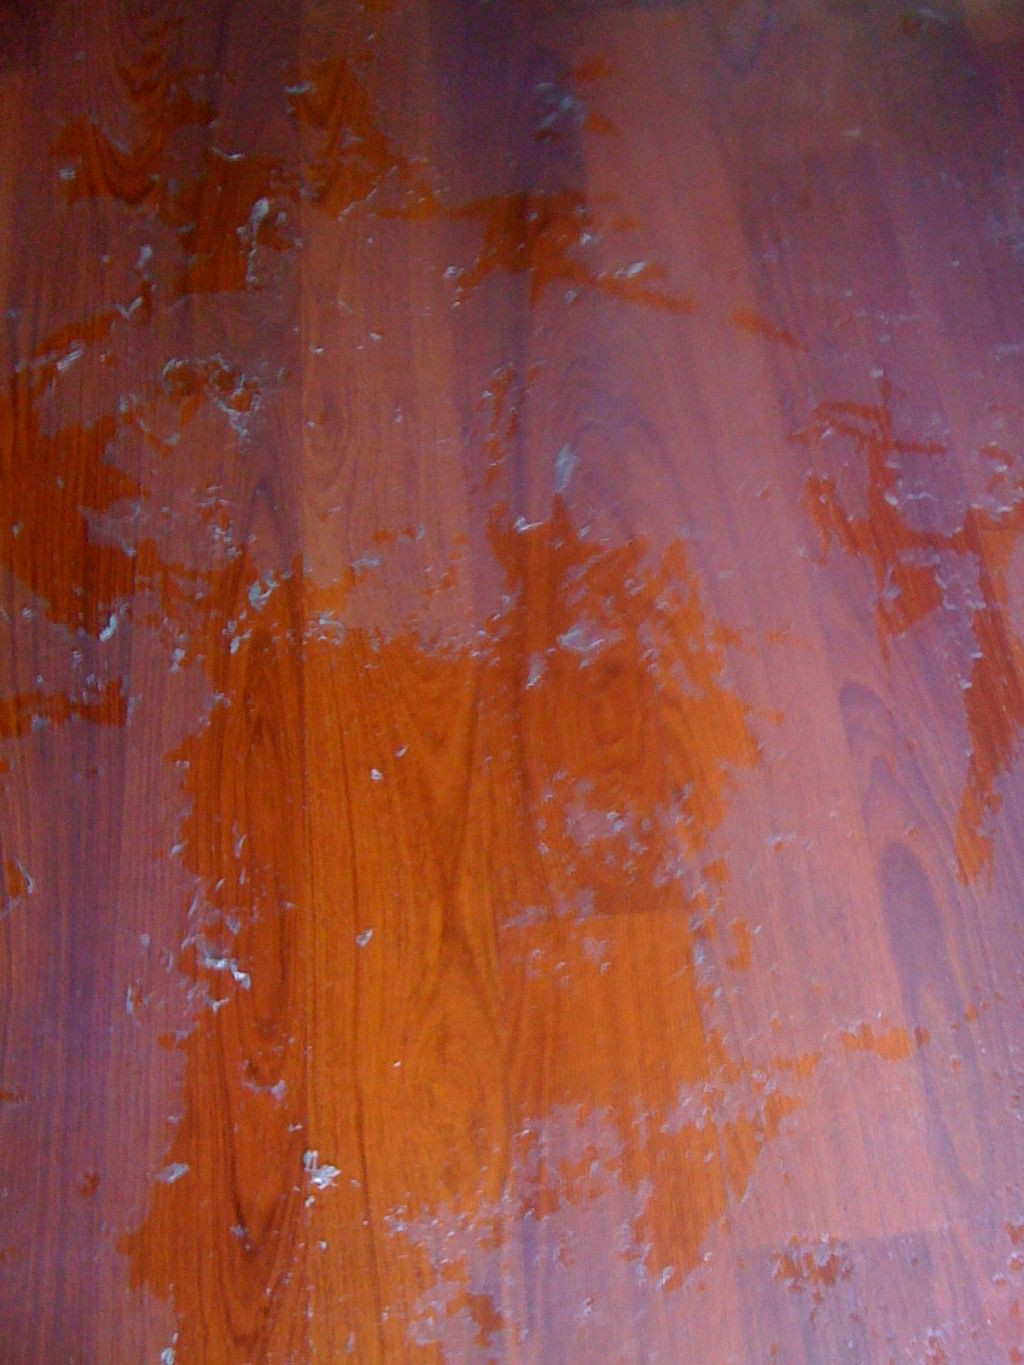 Is Hardwood Flooring Better Than Carpet Of How to Remove Wax and Oil soap Cleaners From Wood Floors Recipes within How to Remove Oily or Wax Build Up From Cleaning or Polishing solutions From Wood Floors